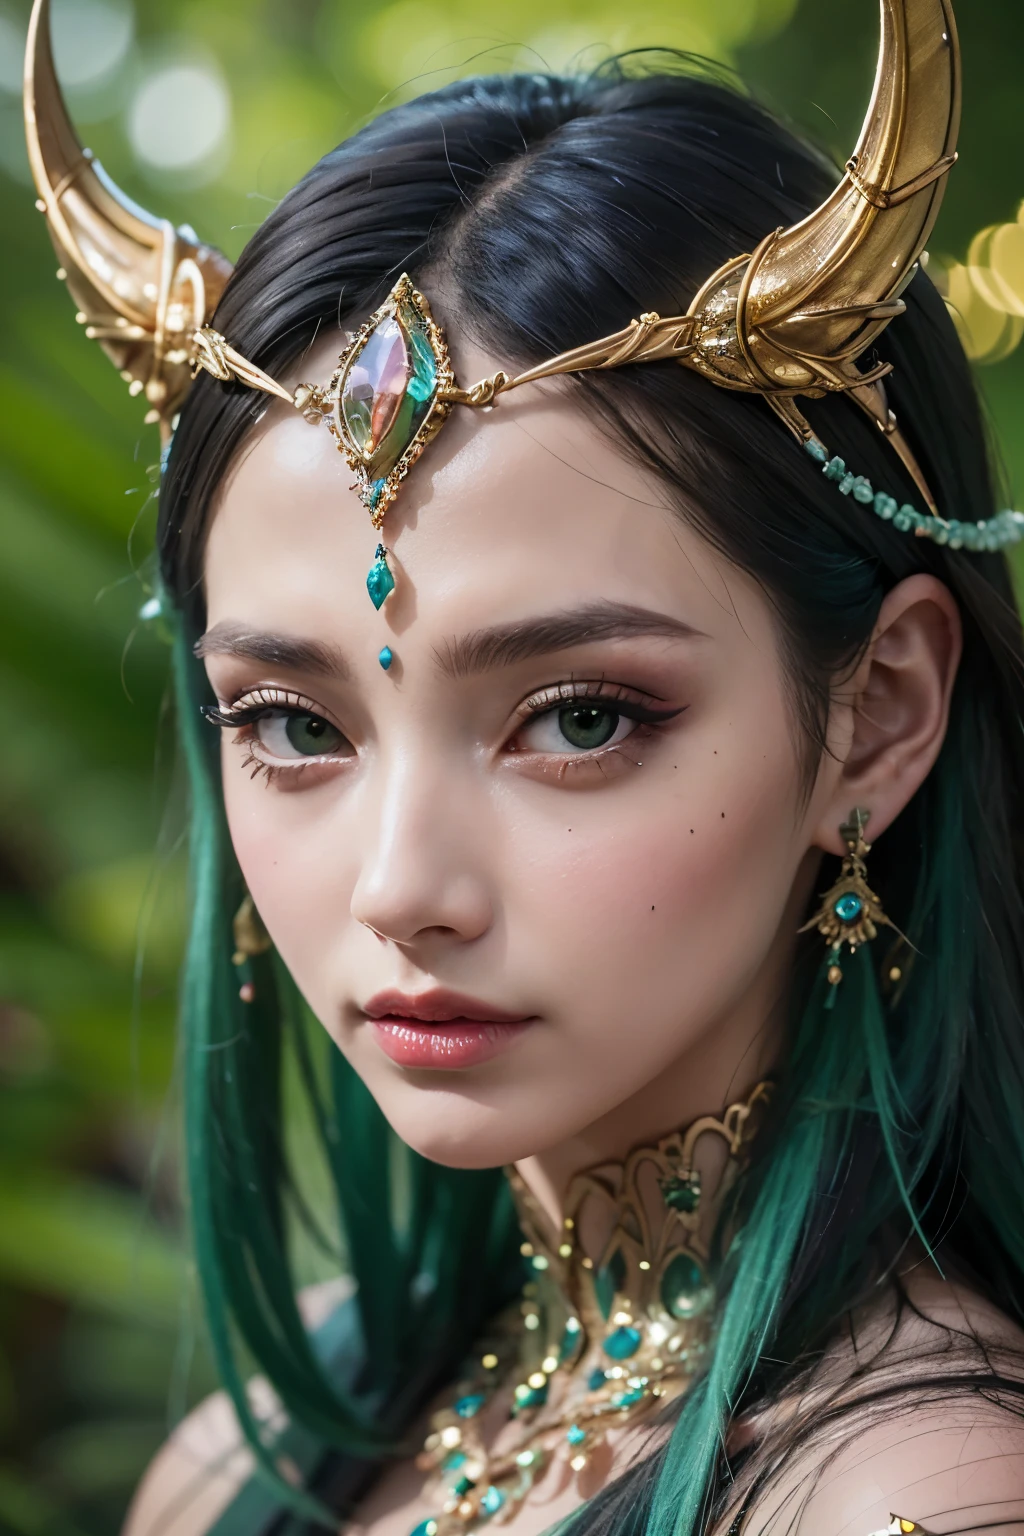 (best quality,4k,8k,highres,masterpiece:1.2),ultra-detailed,(photorealistic,photo-realistic:1.37),A woman with compound eyes that look like the eyes of a praying mantis,futuristic,hi-tech,natural-looking skin,emerald-green compound eyes,exquisite,detailed face features,piercing eyes,long eyelashes and sharp angles,sculptural facial structure,innovative fashion style,metallic,shimmering make-up,glowing eyeliner,ornate futuristic jewelry,elaborate headpiece,feathers and metallic elements,ethereal background with floating holographic particles,controlled lighting with soft highlights,bluish-green color scheme,otherworldly atmosphere.